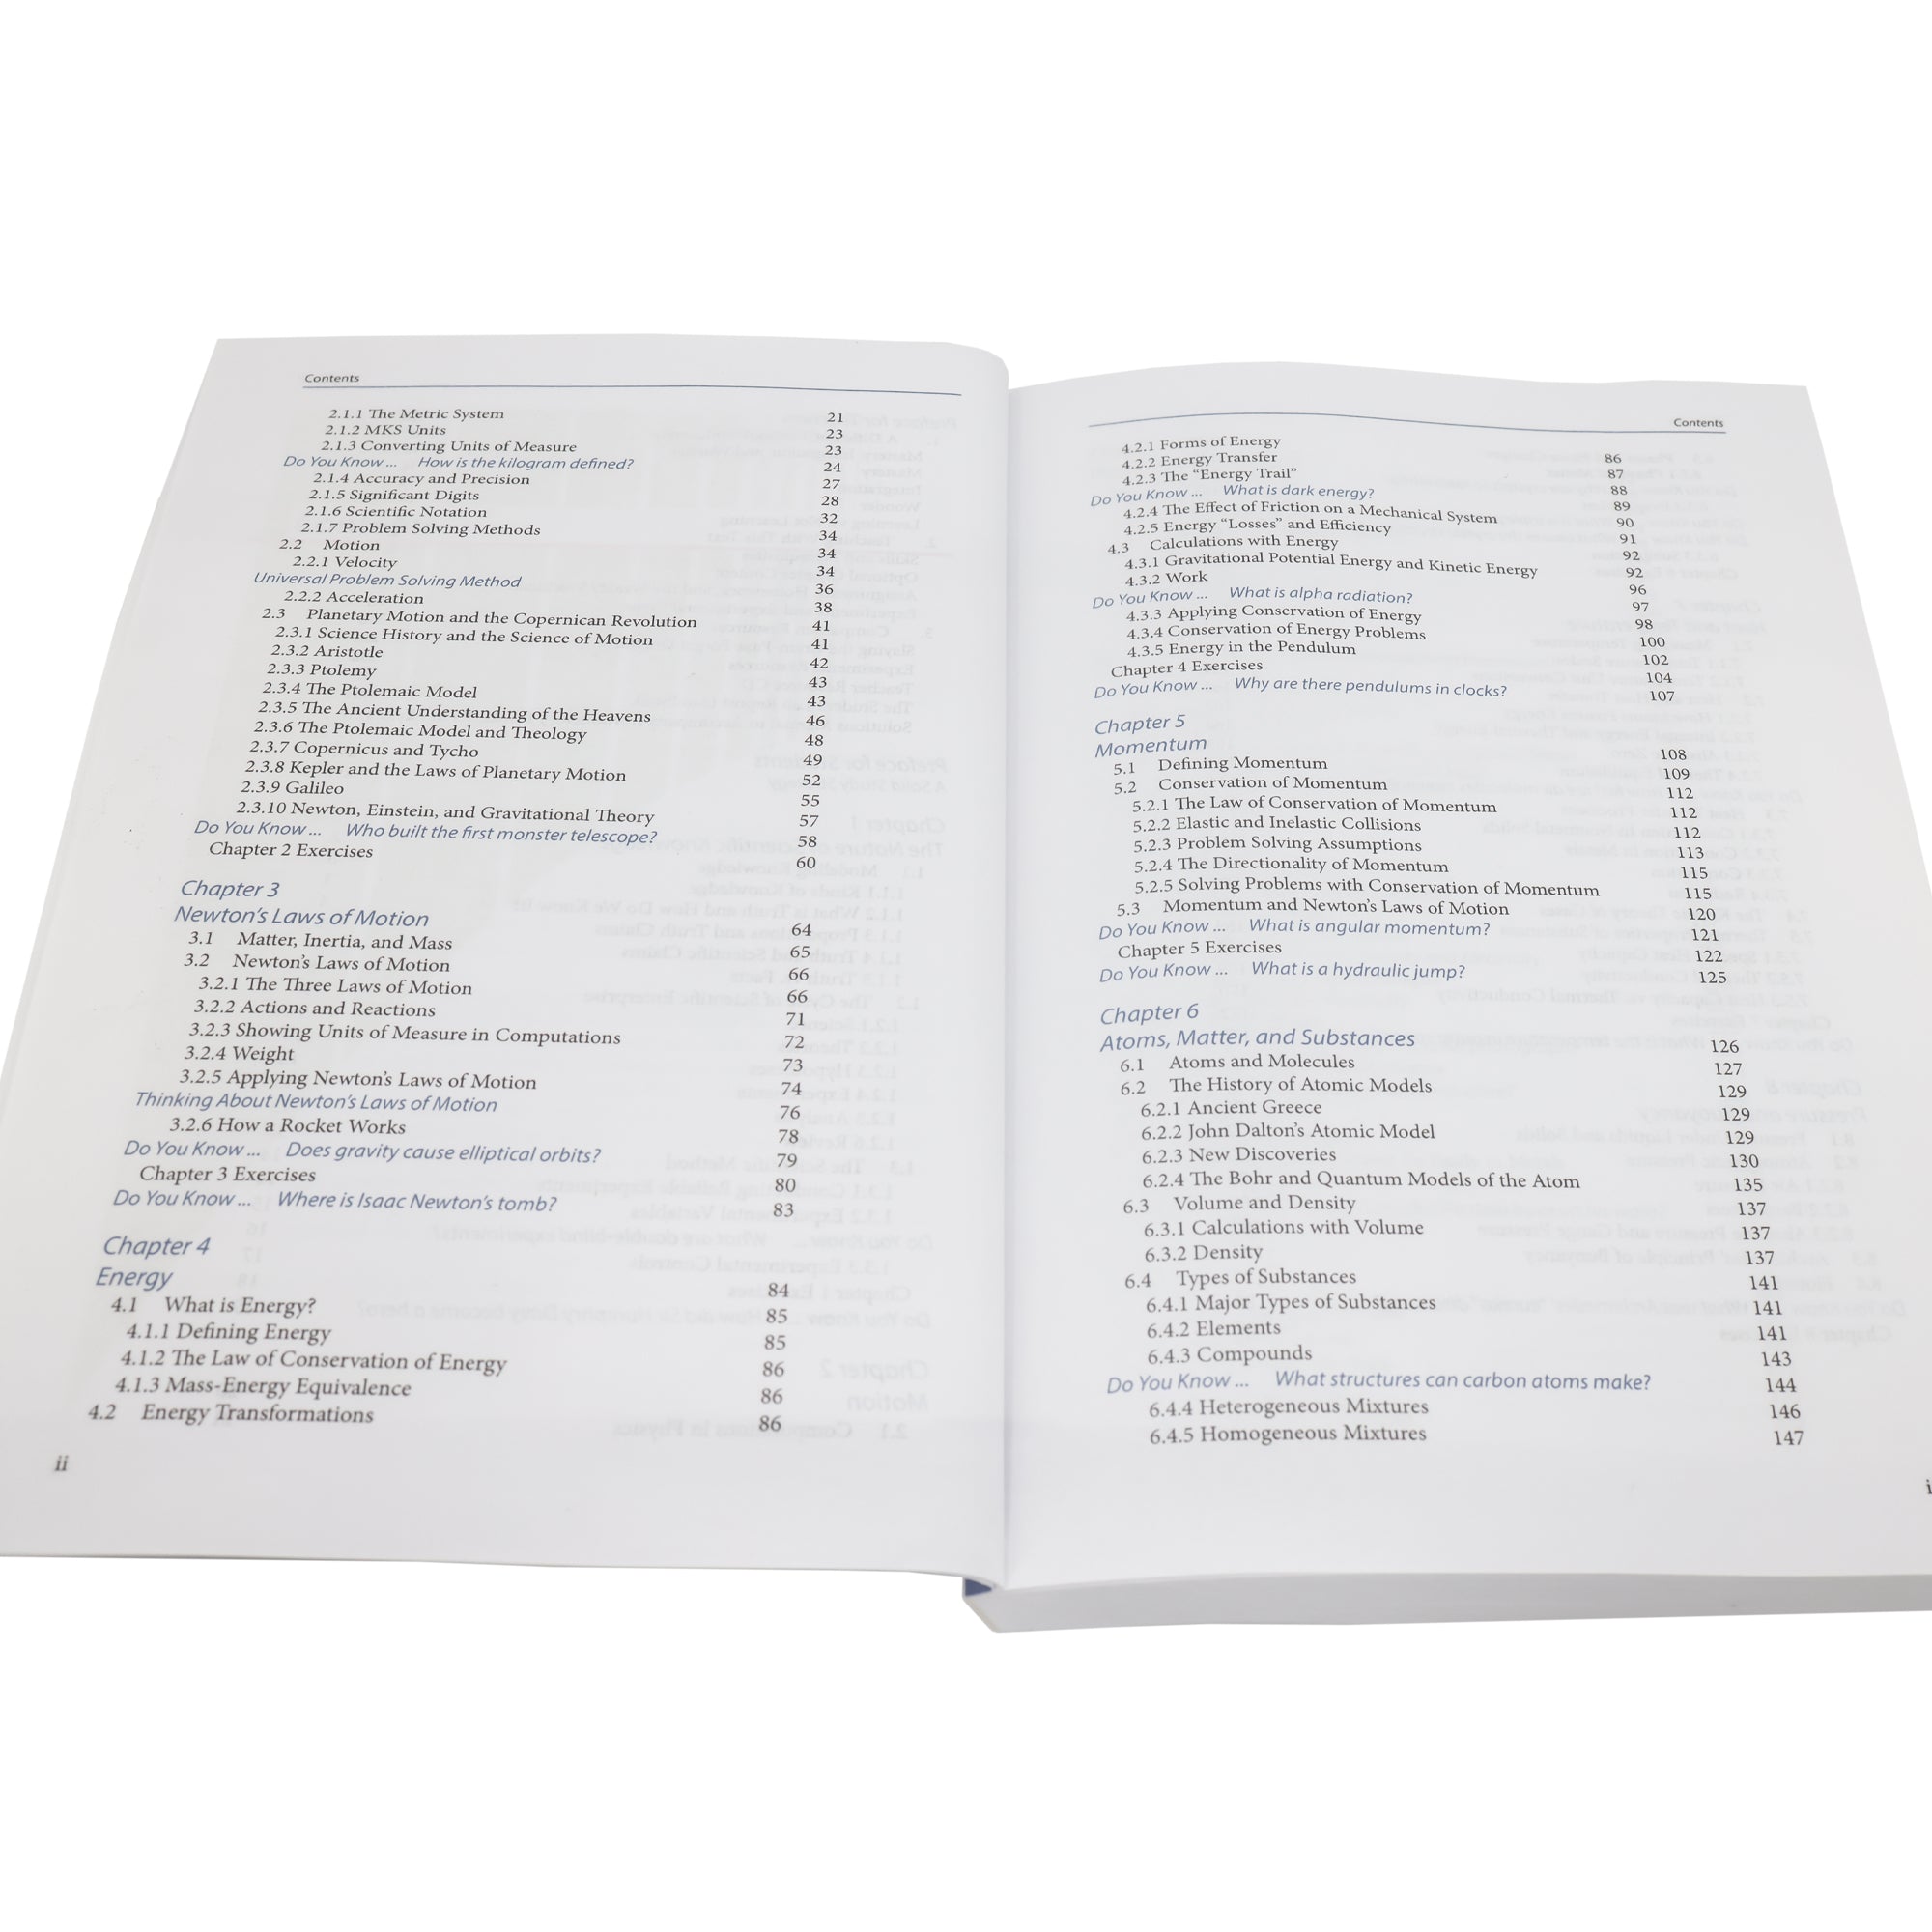 Introductory Principles in Physics open book showing the table of contents.